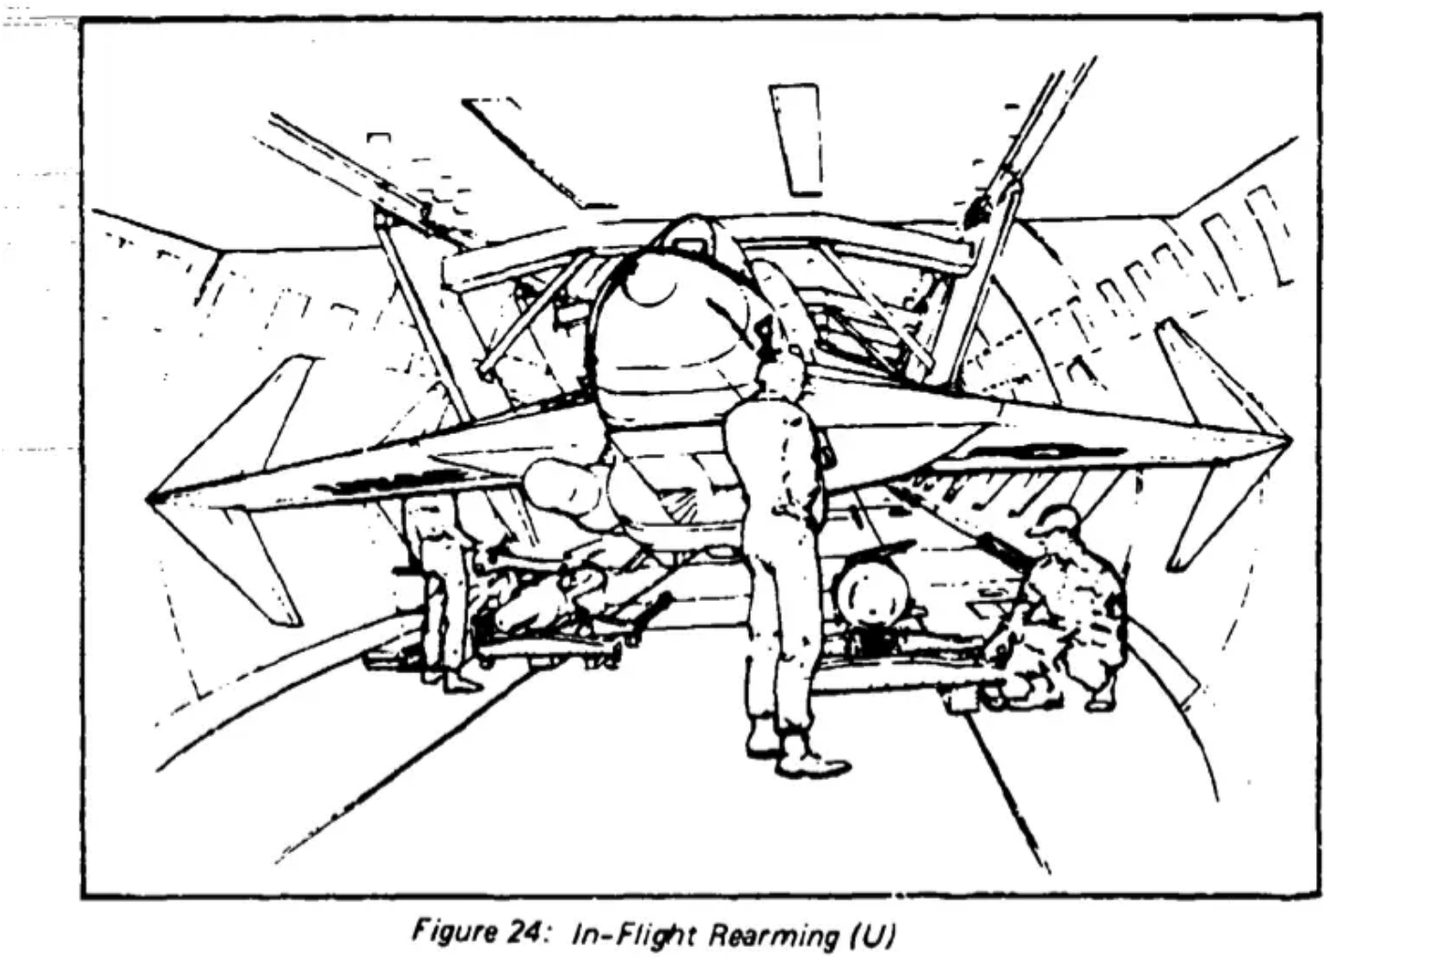 Sketch of a micro fighter inside a 747 fuselage.